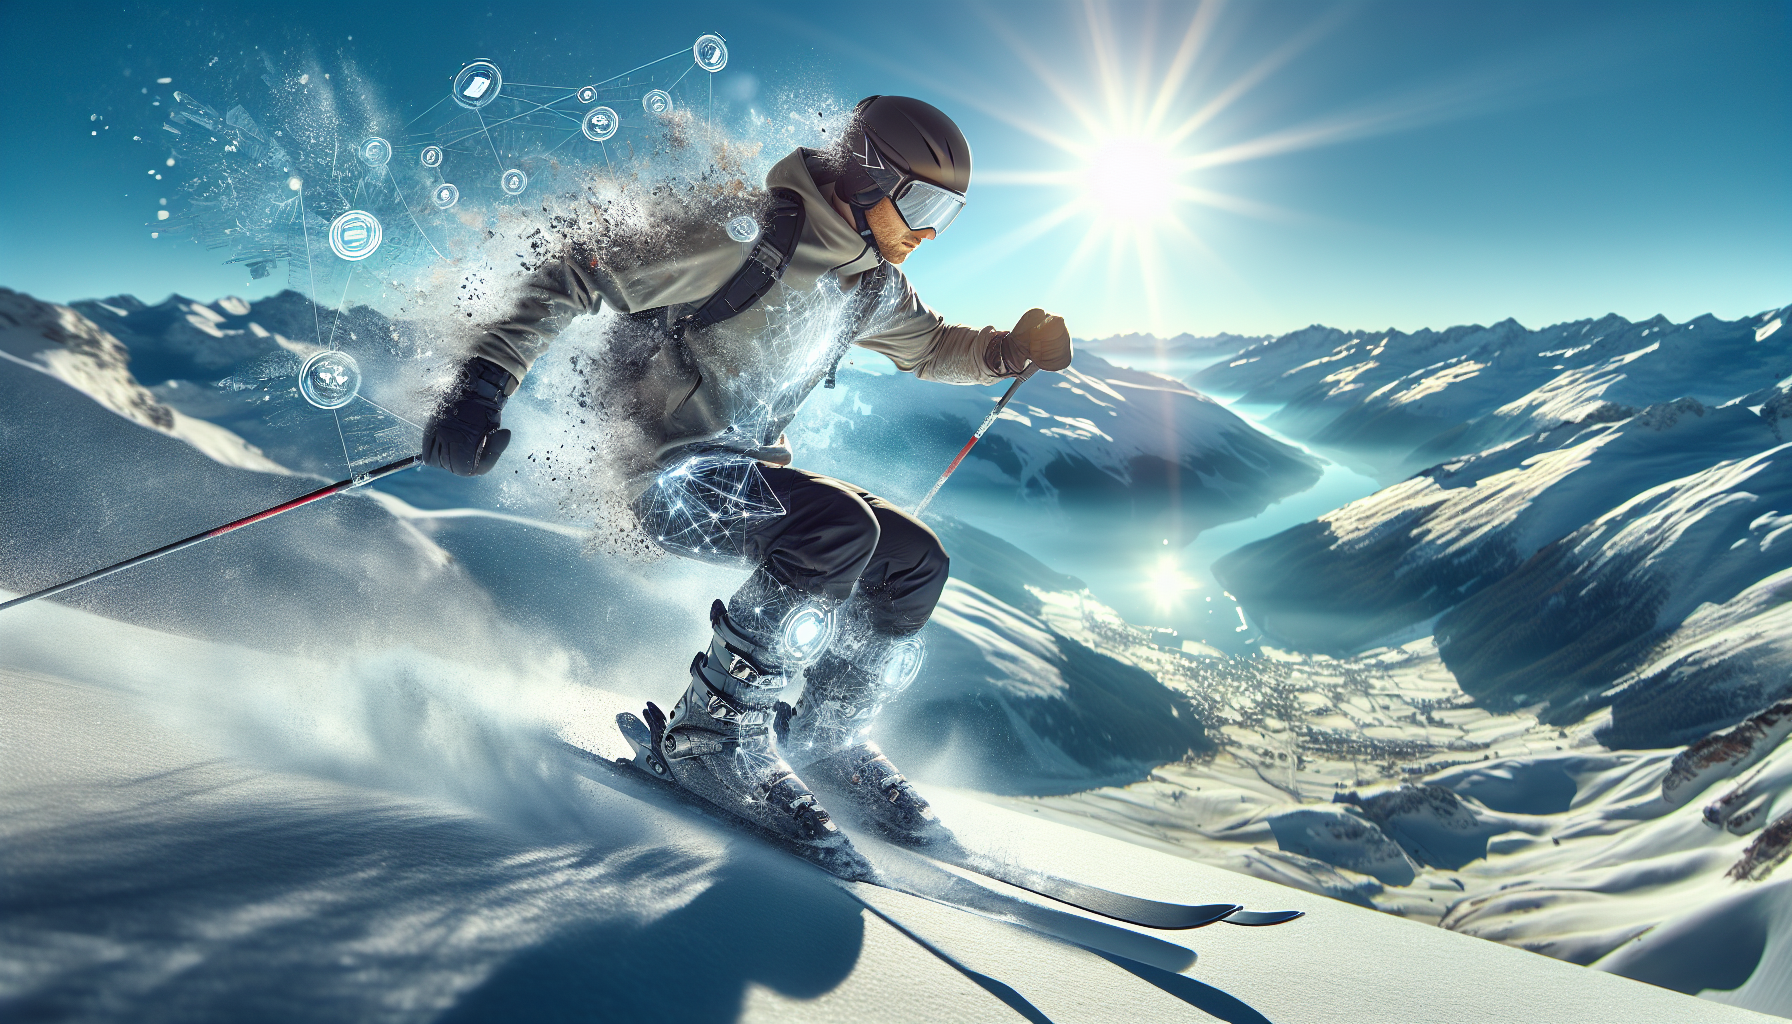 Skiing In The Digital Age: How Technology Is Changing The Sport